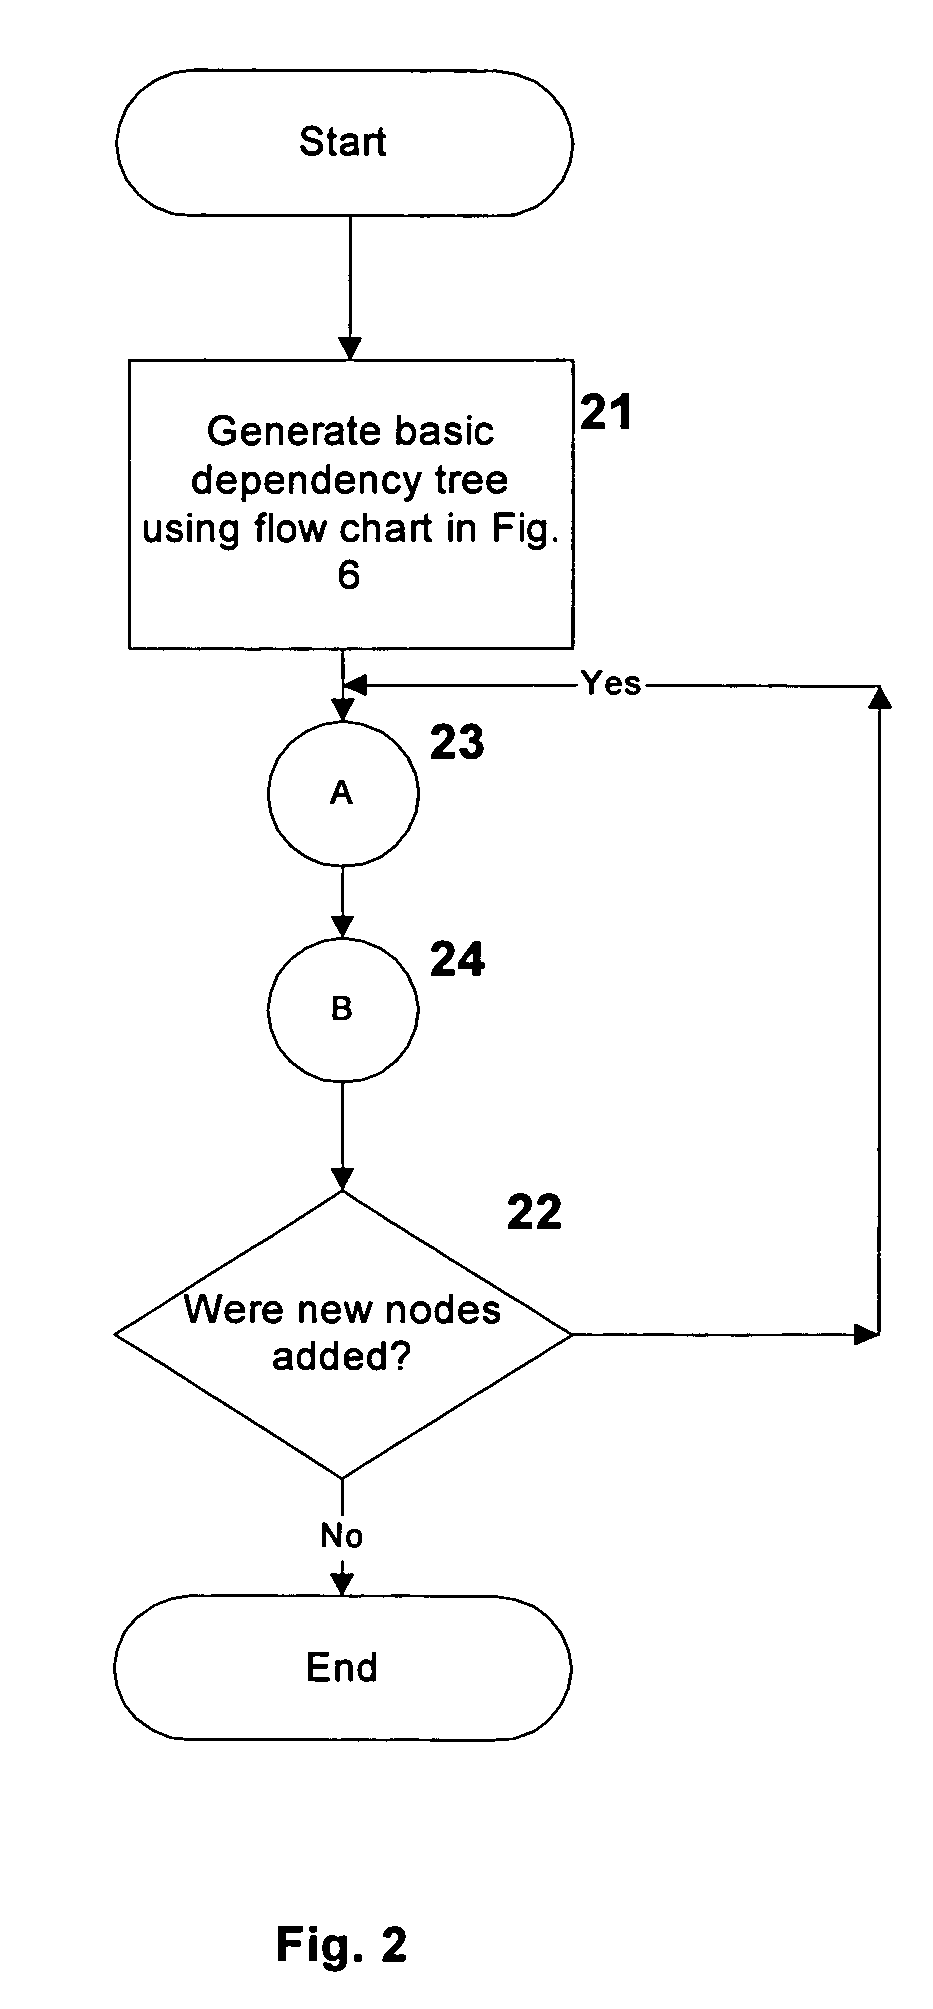 System and method for recursive path analysis of DBMS procedures